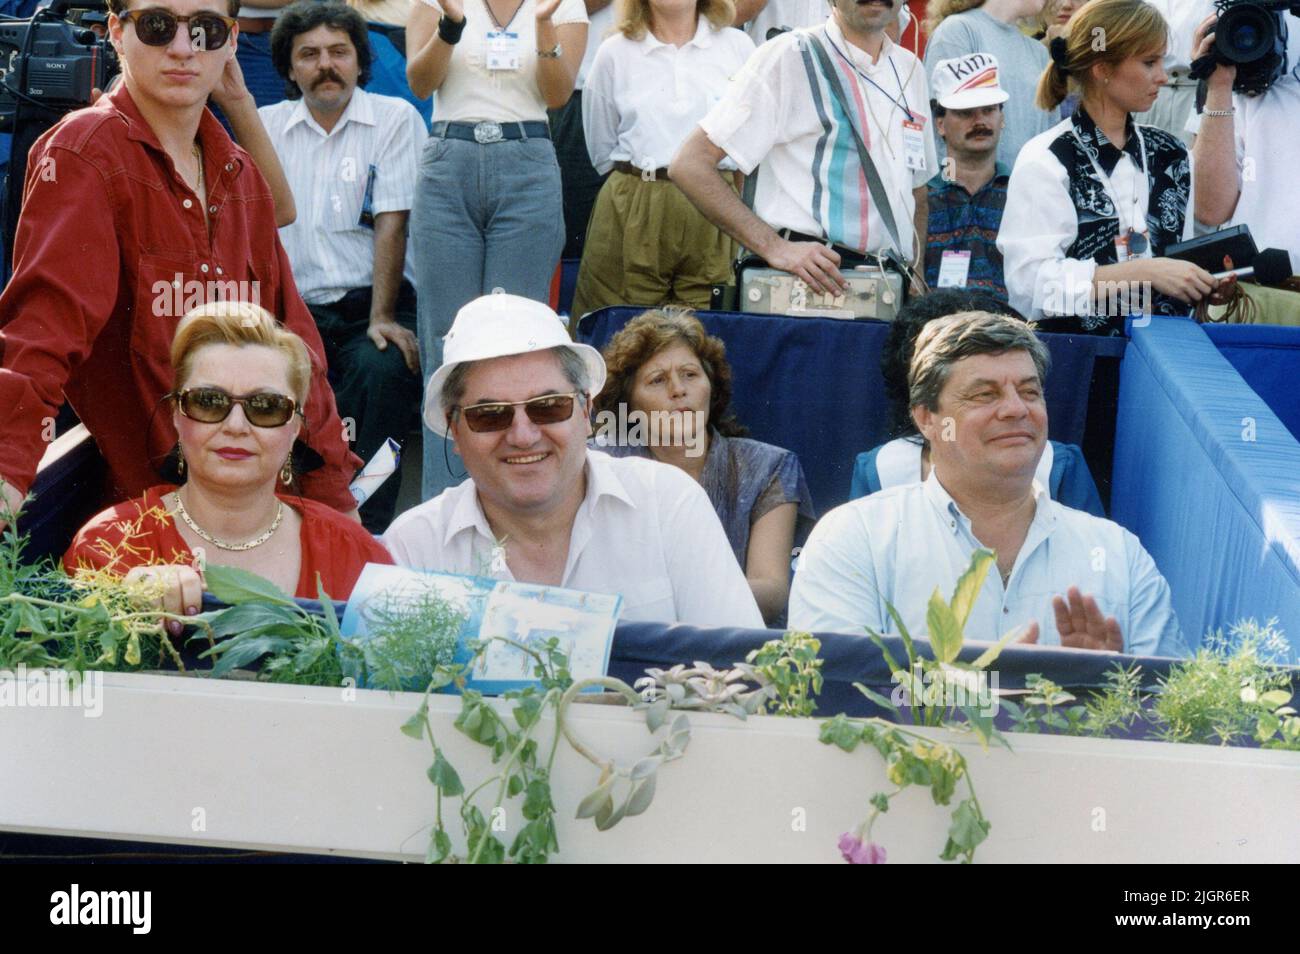 Dumitru Dragomir, former president of the Romanian Professional Football League with his wife, approx. 1993 Stock Photo